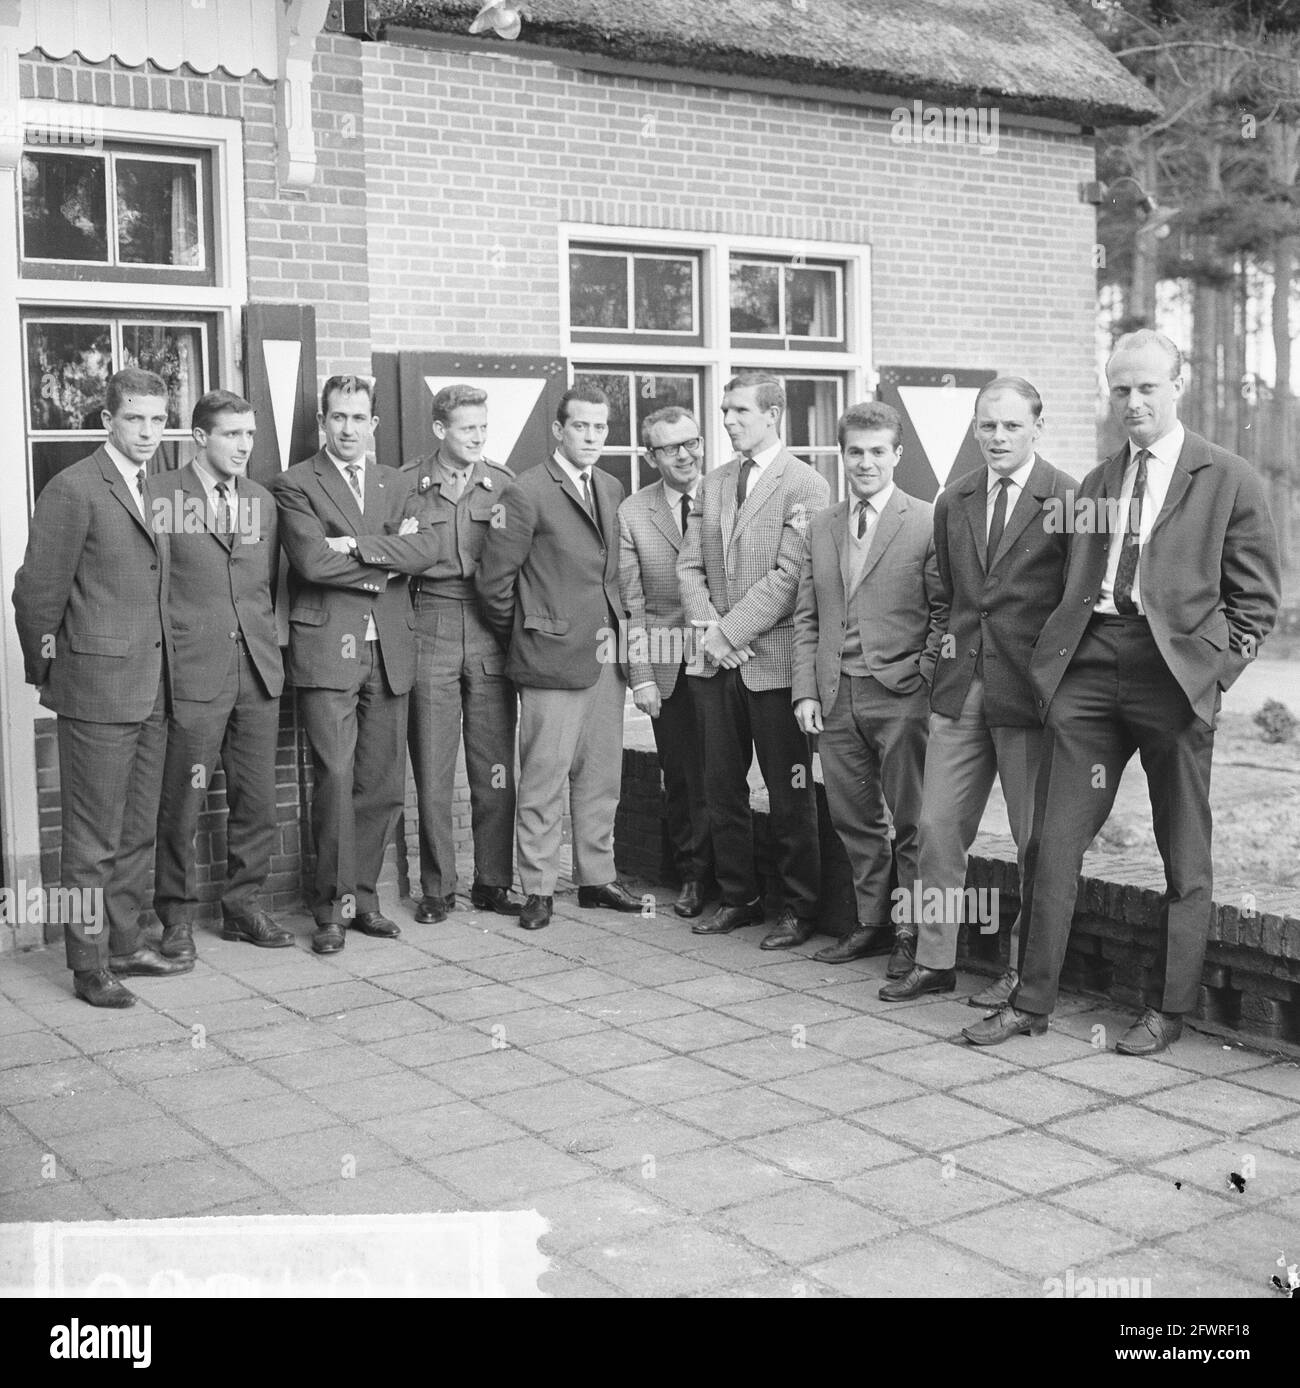 Dutch national team against Belgium announced from left to right Haak, Veldhoen, E.P. Graafland, Nuninga, Schrijvers, Van Wisse Kraay, Muller, Gerard 'Pummie' Bergholtz, Kruiver, March 17, 1964, eleven, sport, soccer, The Netherlands, 20th century press agency photo, news to remember, documentary, historic photography 1945-1990, visual stories, human history of the Twentieth Century, capturing moments in time Stock Photo